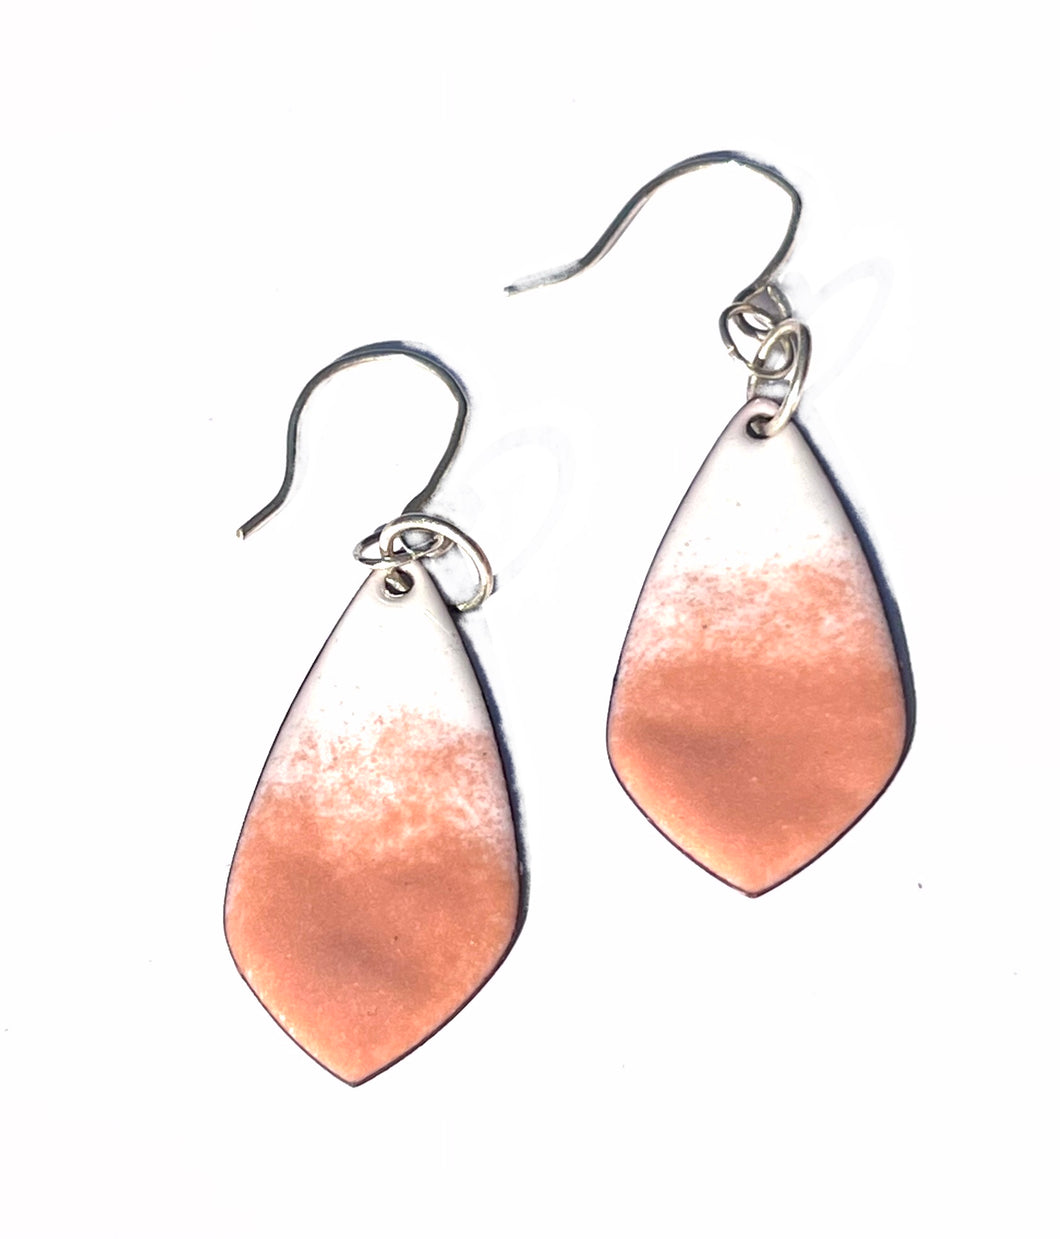 Pink and White Dangle Earrings